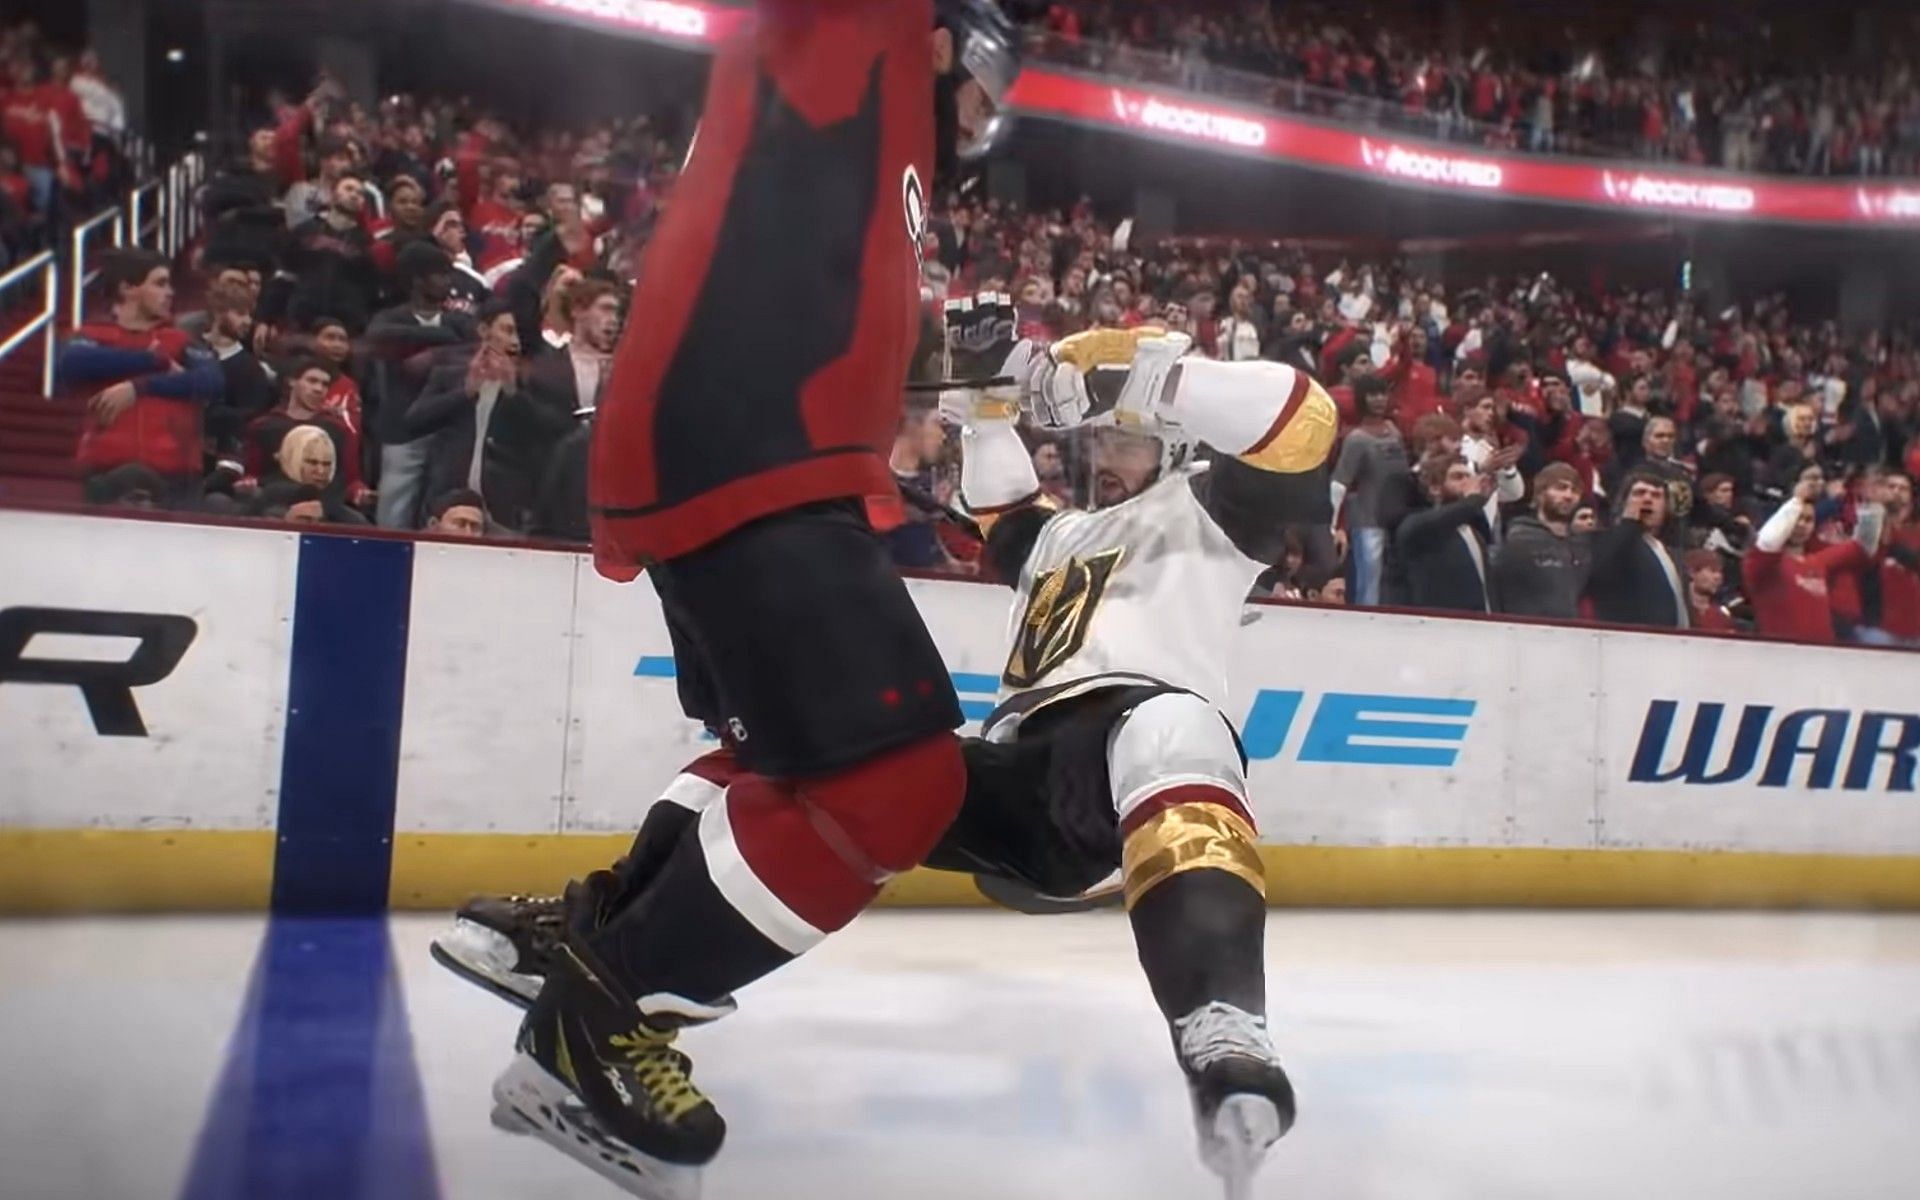 Throwing out punches is a classic on the ice. (Image via Electronic Arts)